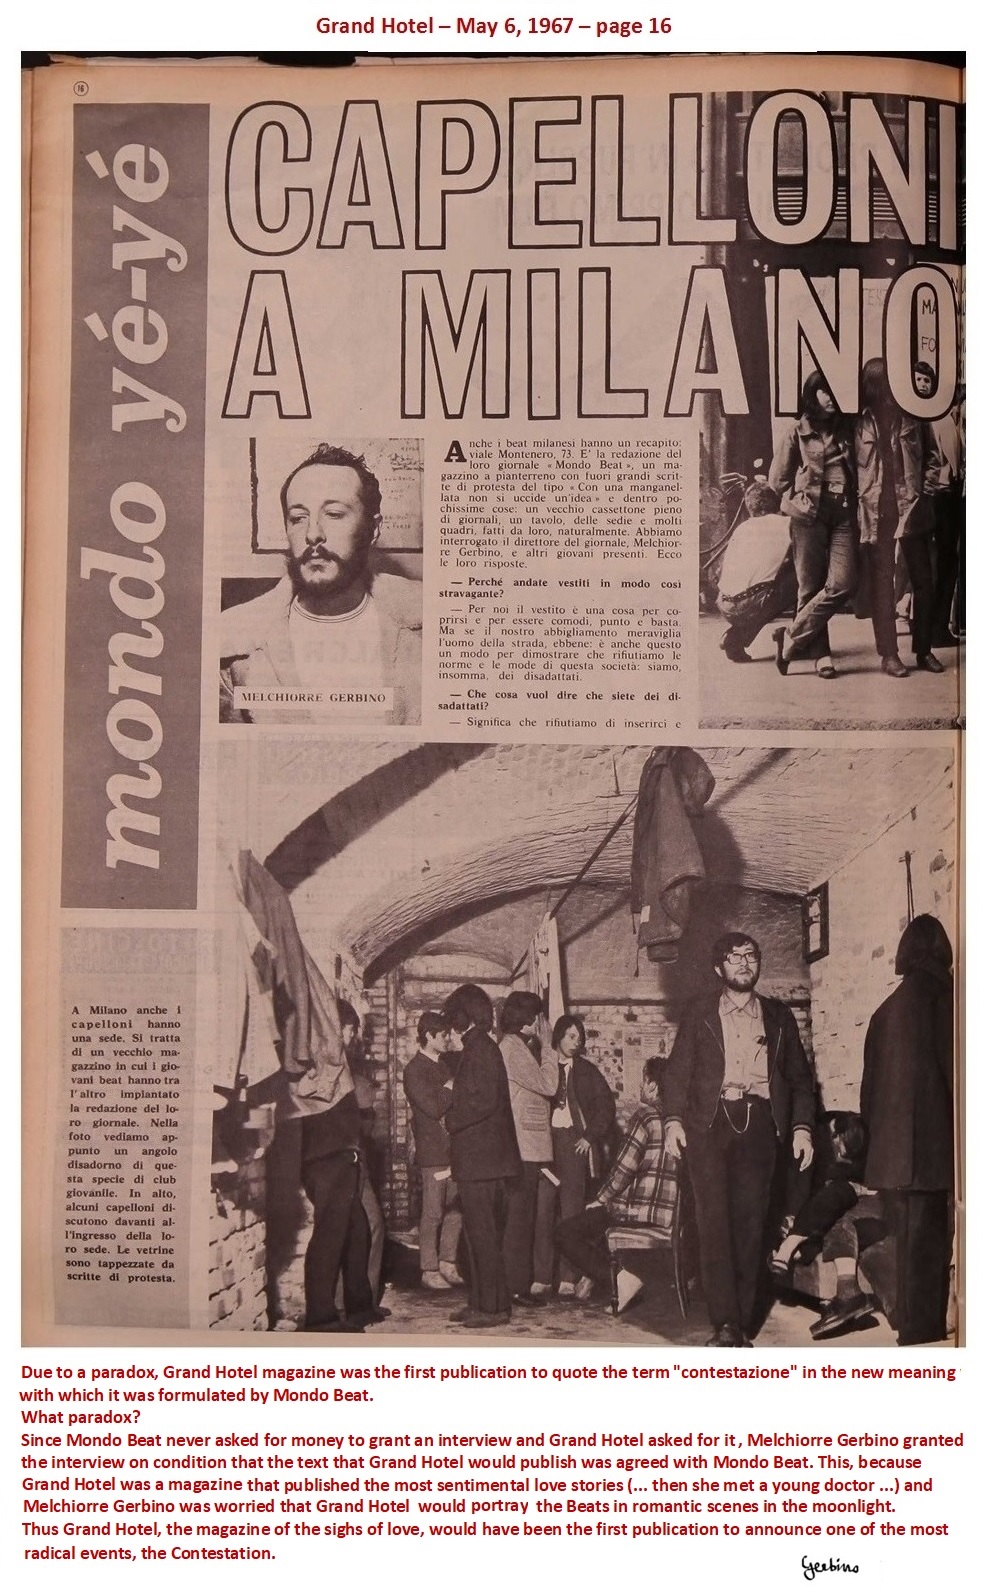 This article appeared on May 6, 1967 (1)